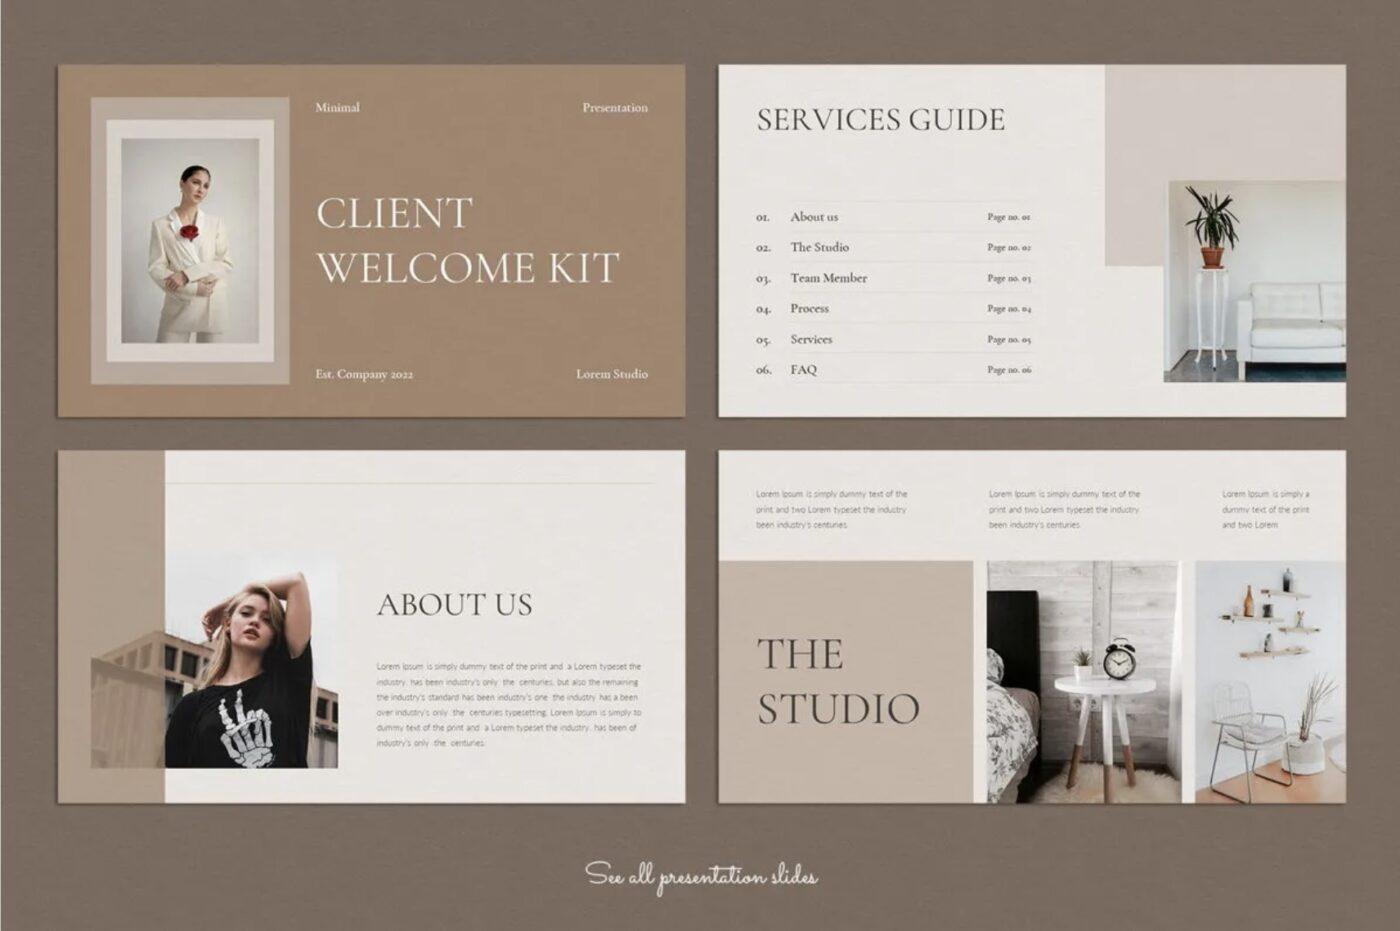 Client Welcome Kit Presentation Template by Poweredtemplate